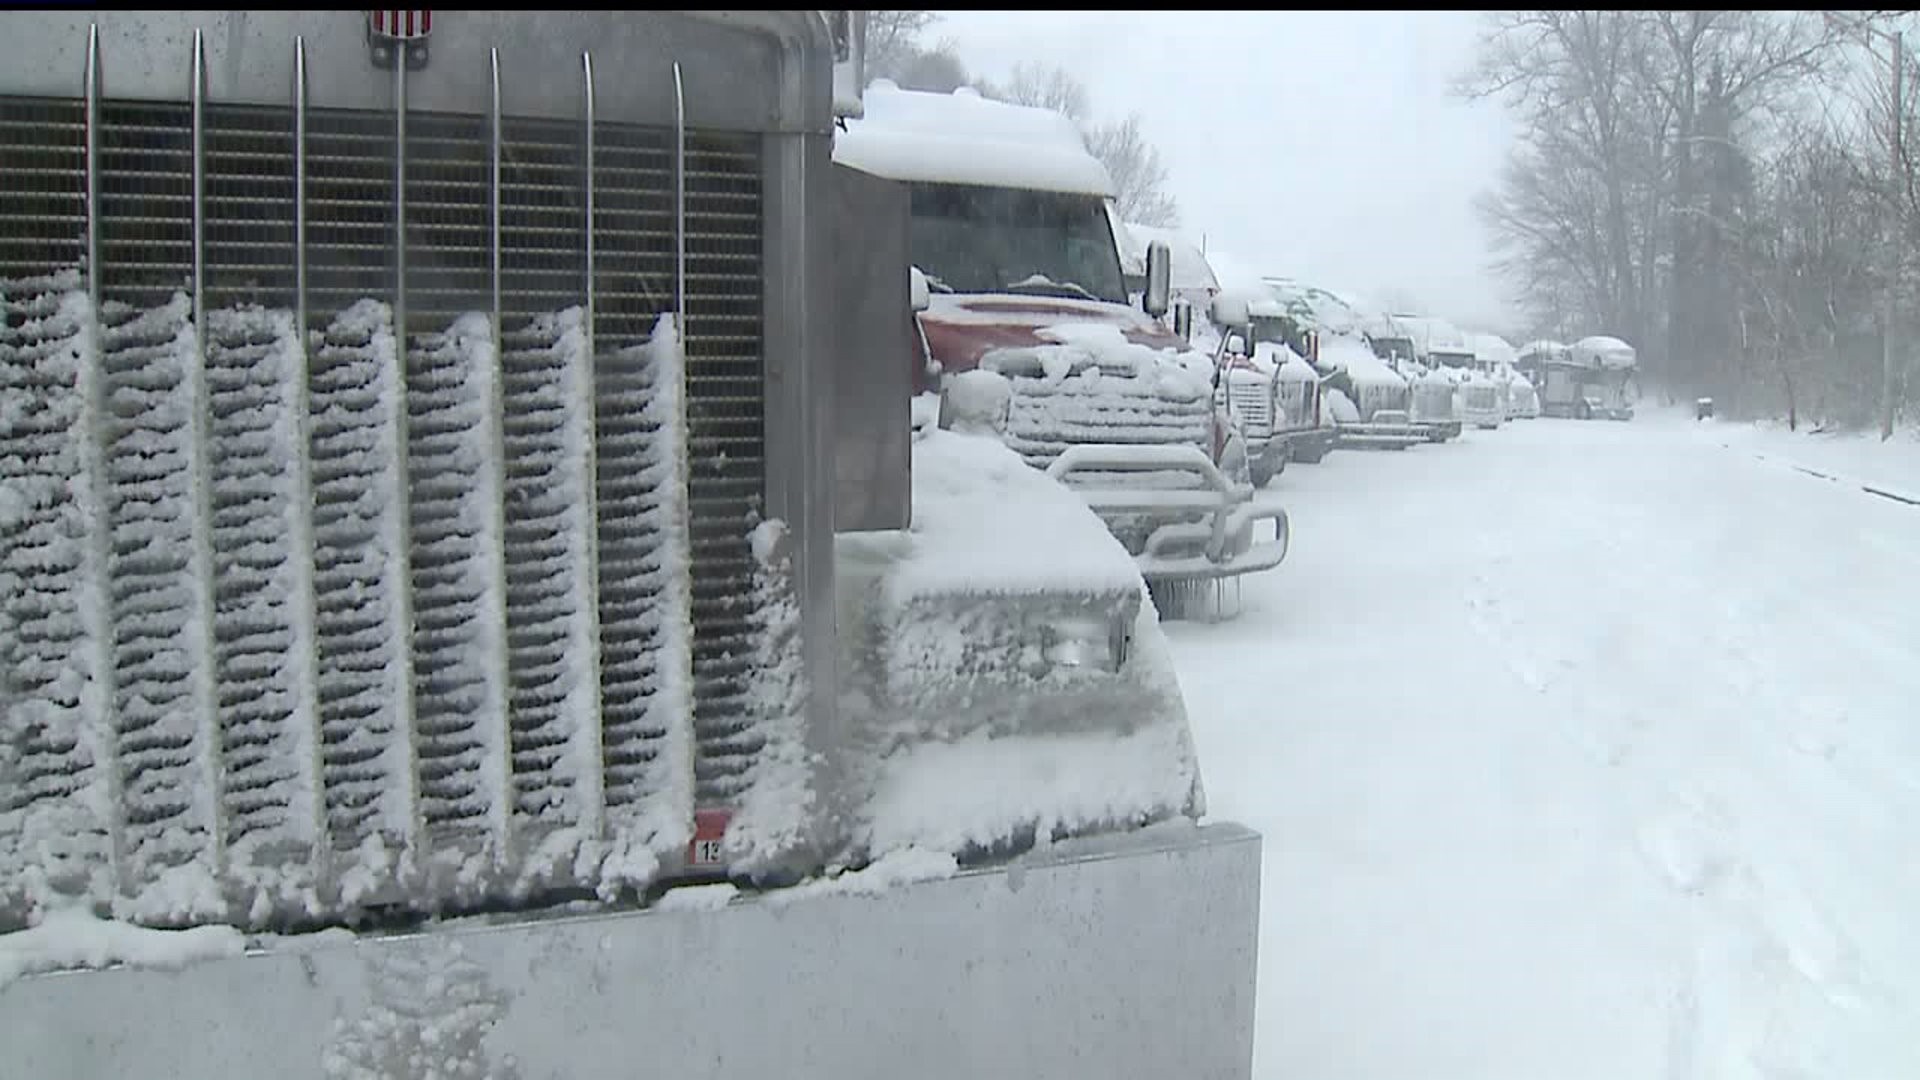 Snow brings bad conditions for drivers on the roads